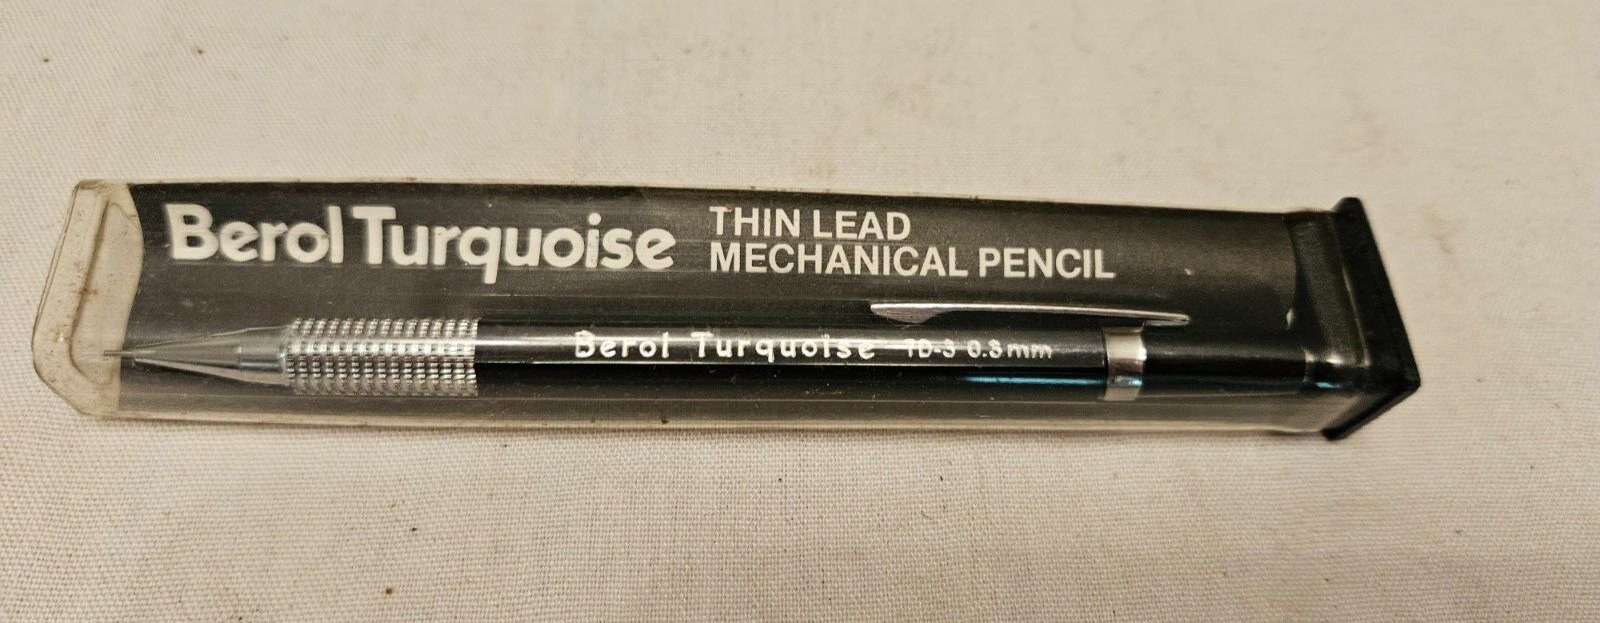 NOS VTG Berol Turquoise  Automatic TD-3 0.3mm Drafting Mechanical Pencil Thin